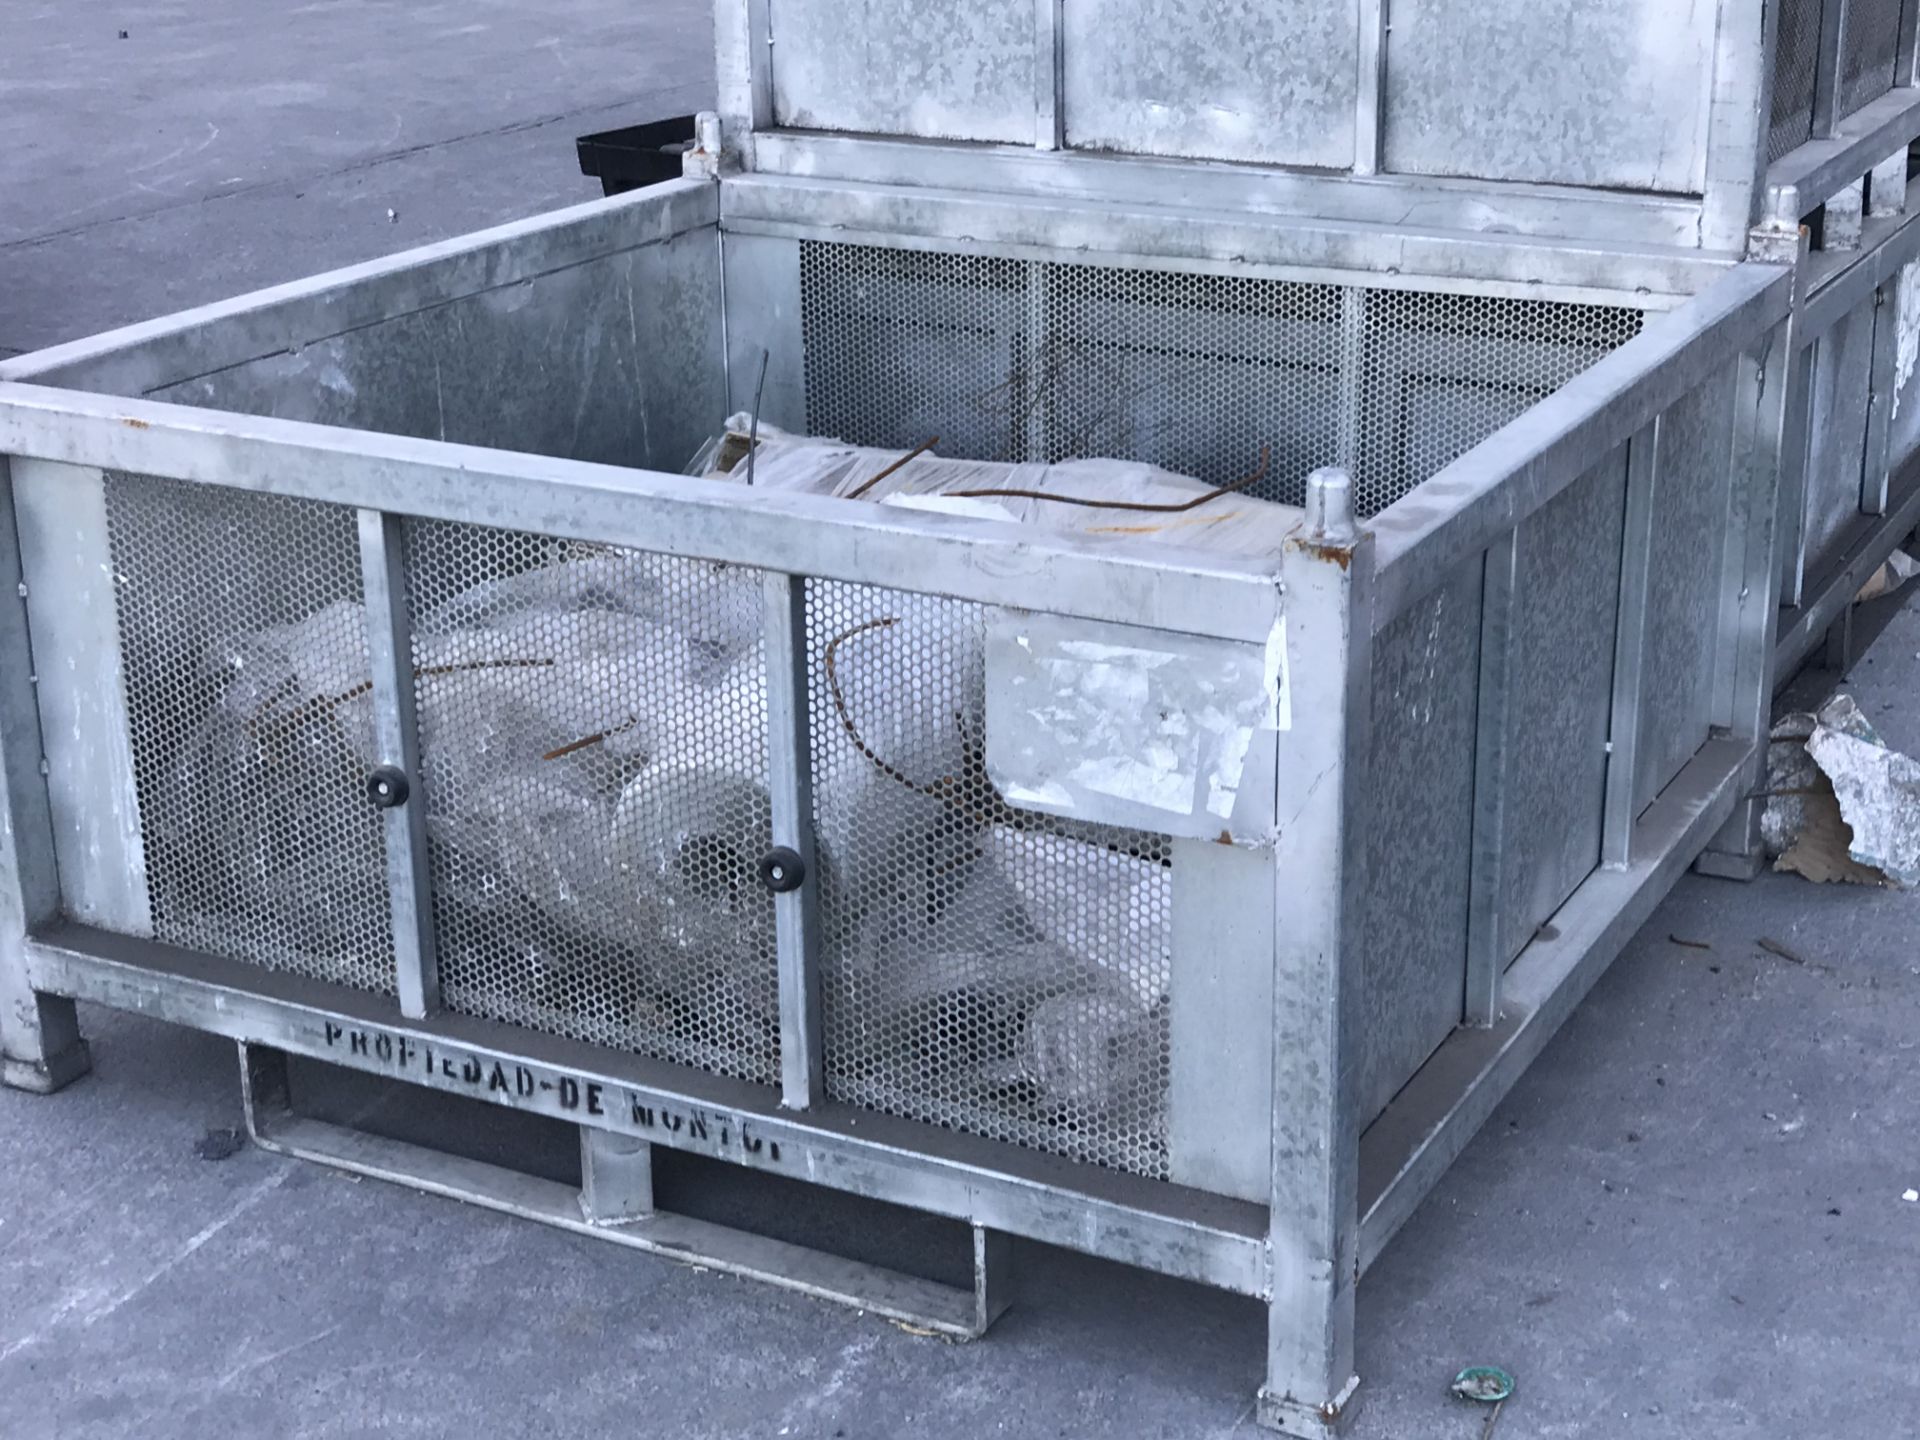 70 GALVANIZED STEEL CONTAINERS XYTEC (DIMENSIONS 0.60x1.32x1.24 METERS) - Image 4 of 8